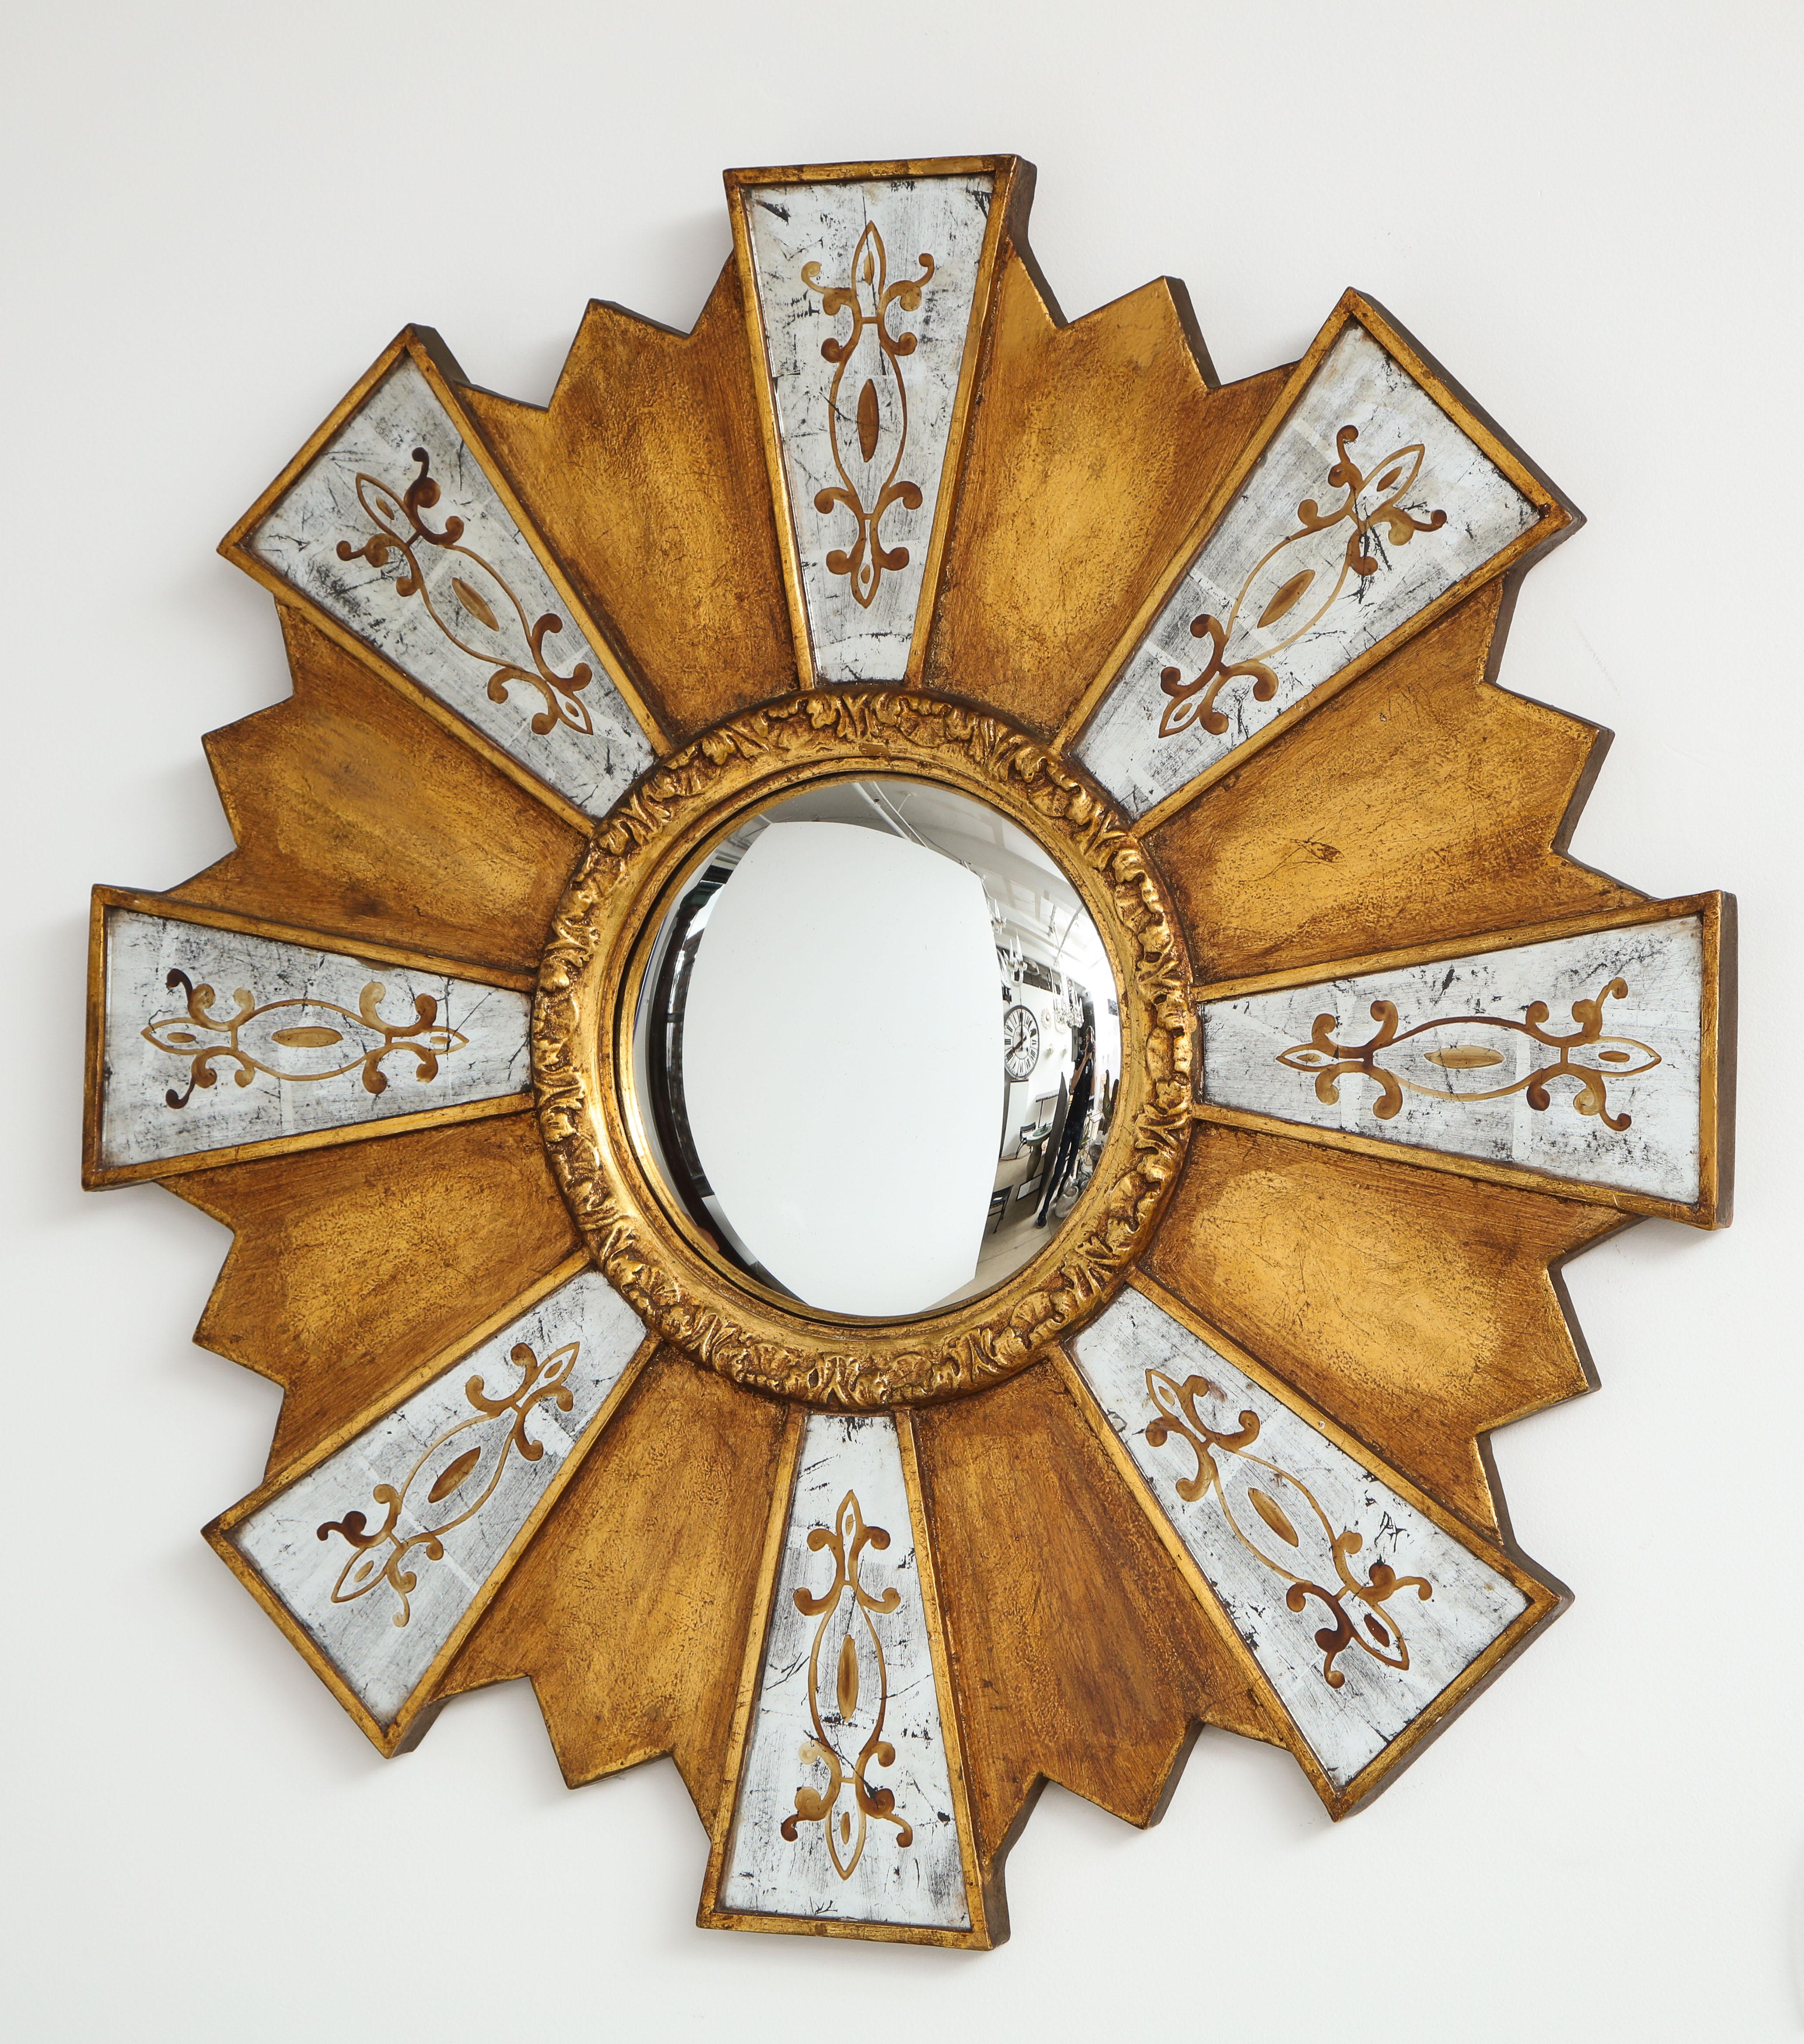 Roundel mirror having central convex beaded gilt mirror flanked by eglomise rays